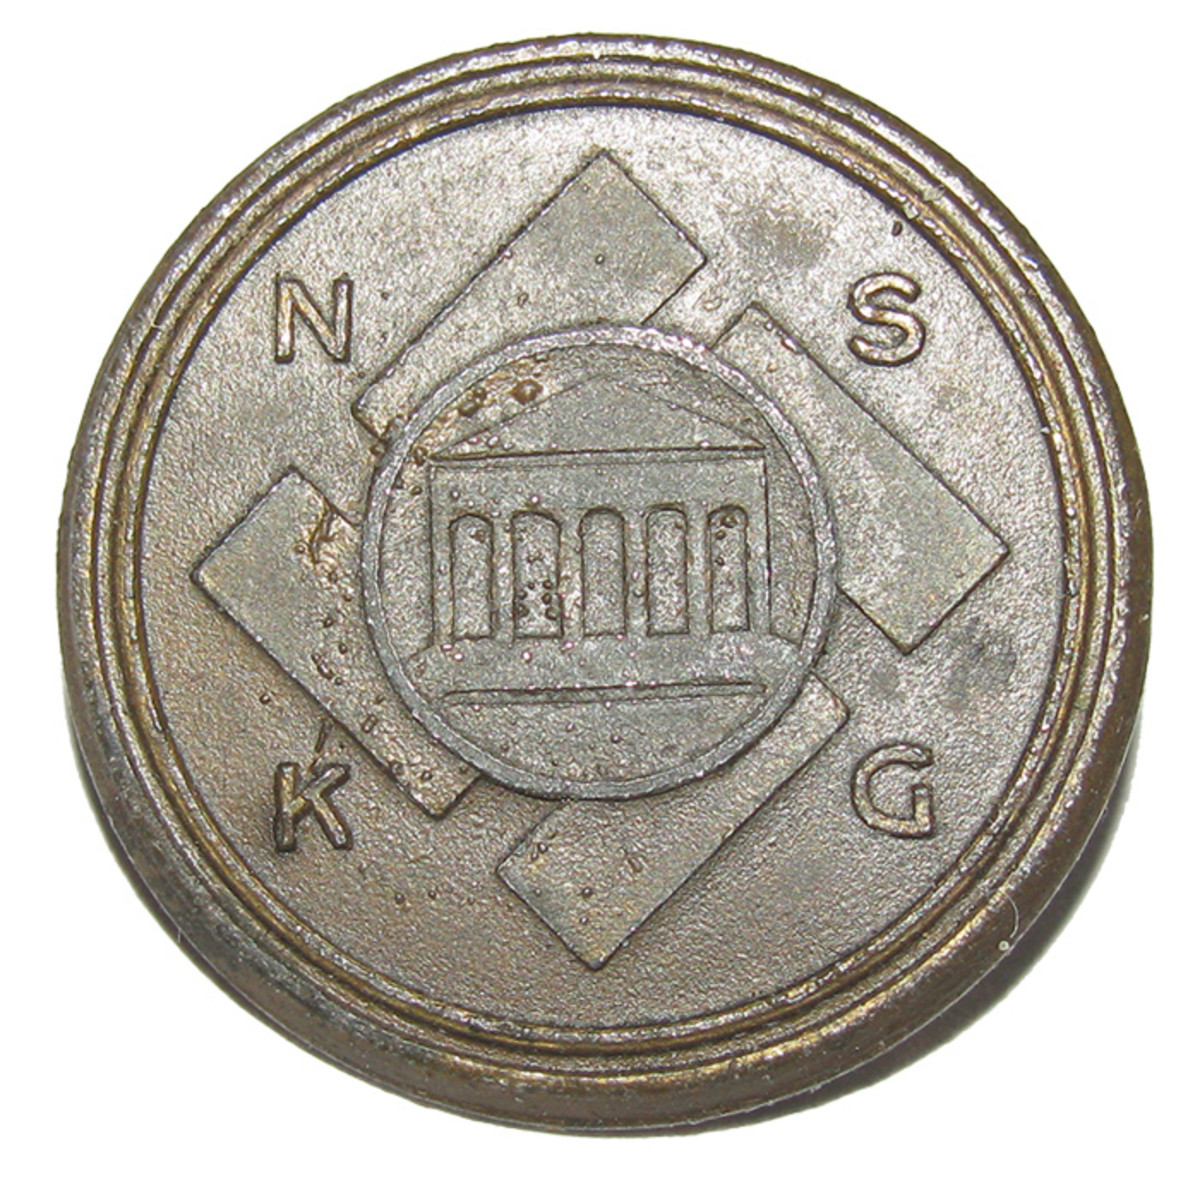 The bronze membership button for a member of the “NS-Kulturgemeinde” exhibited a stylized Grecian temple.